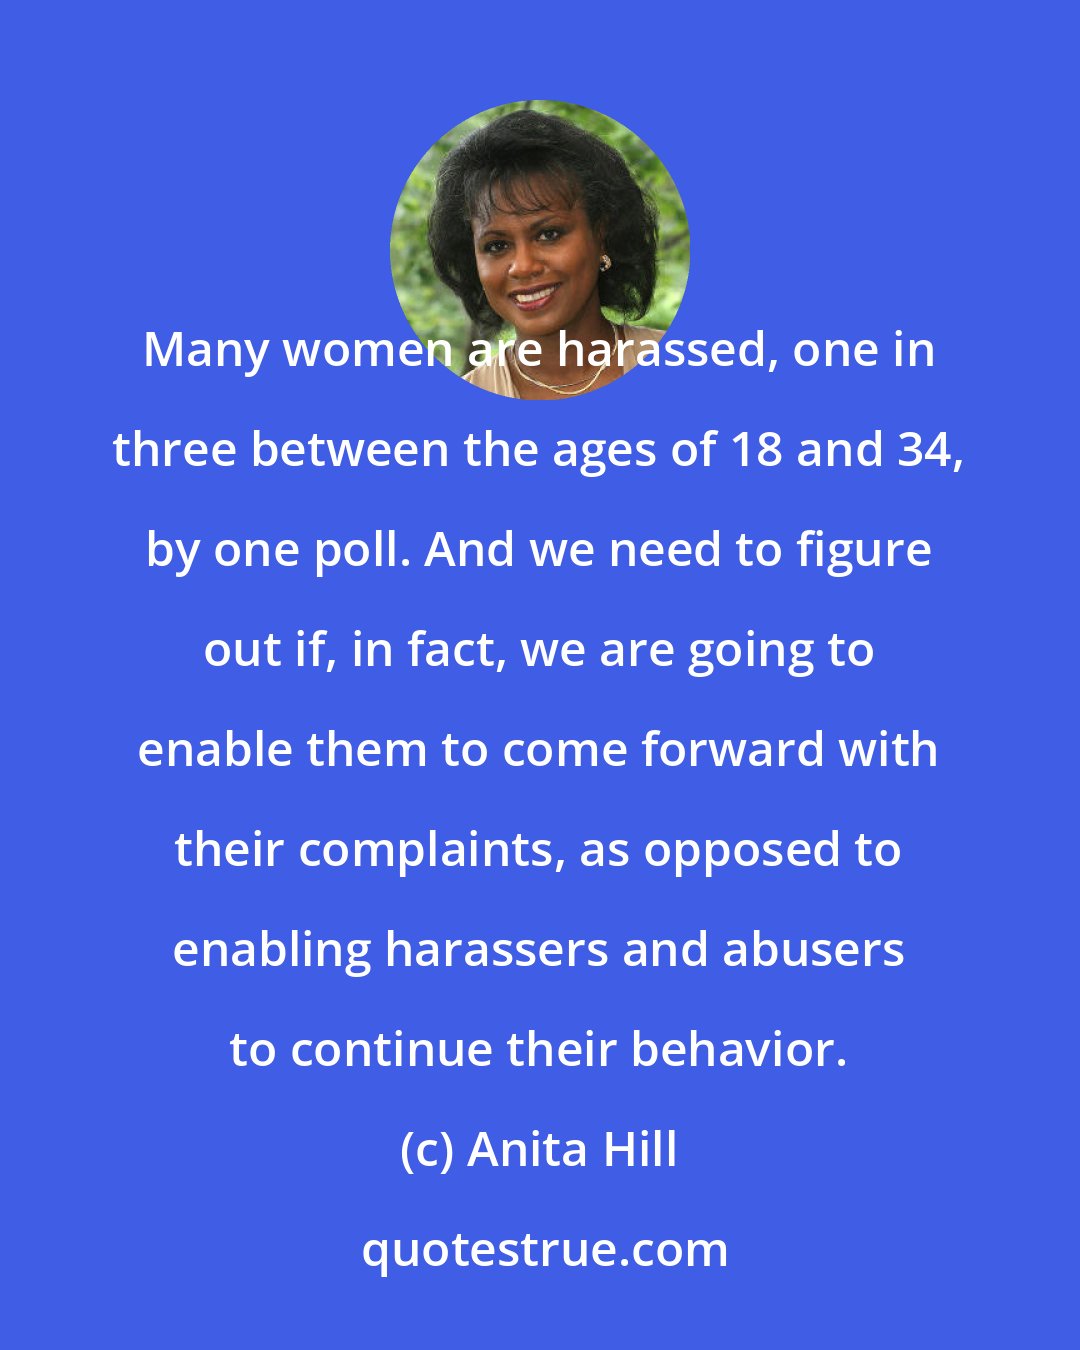 Anita Hill: Many women are harassed, one in three between the ages of 18 and 34, by one poll. And we need to figure out if, in fact, we are going to enable them to come forward with their complaints, as opposed to enabling harassers and abusers to continue their behavior.